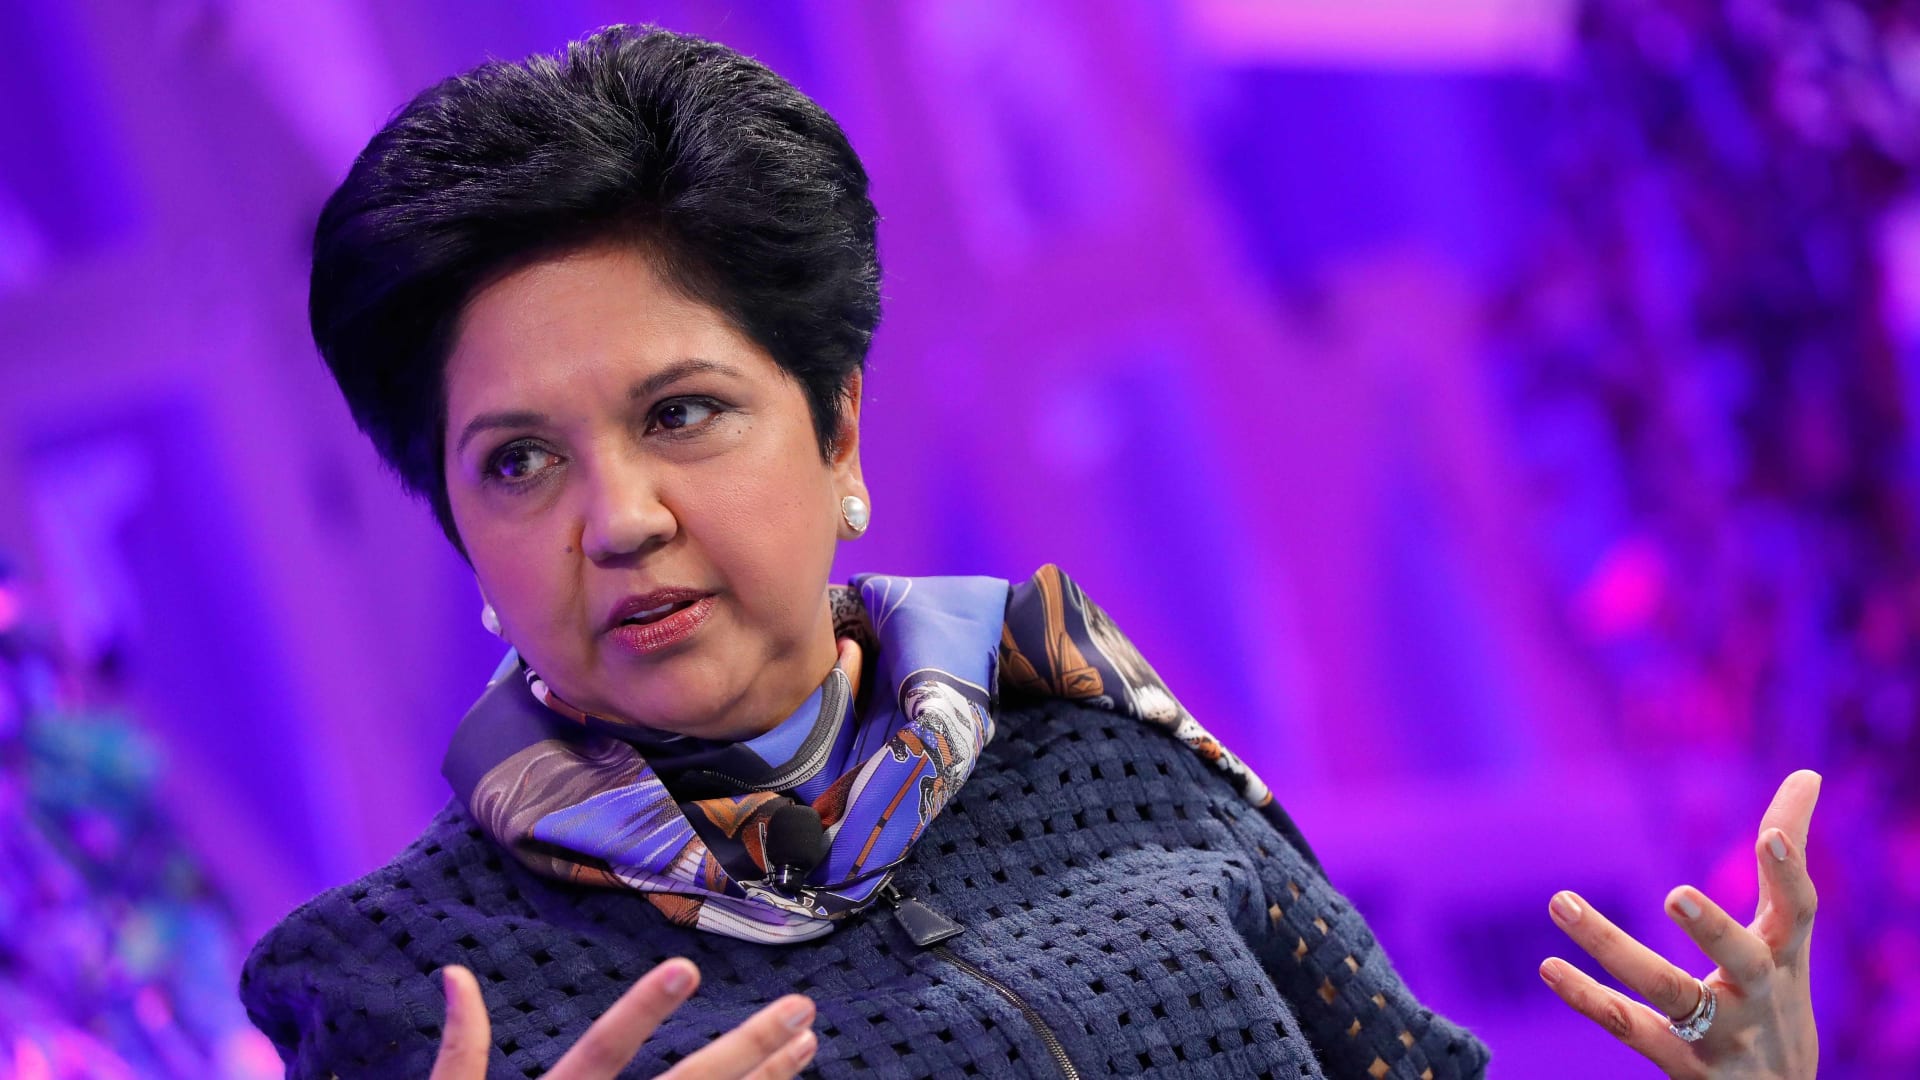 Pepsi's Former CEO Shared The 1 Sentence Secret To Her Success As A Leader. It's The Opposite Of What We've Been Told